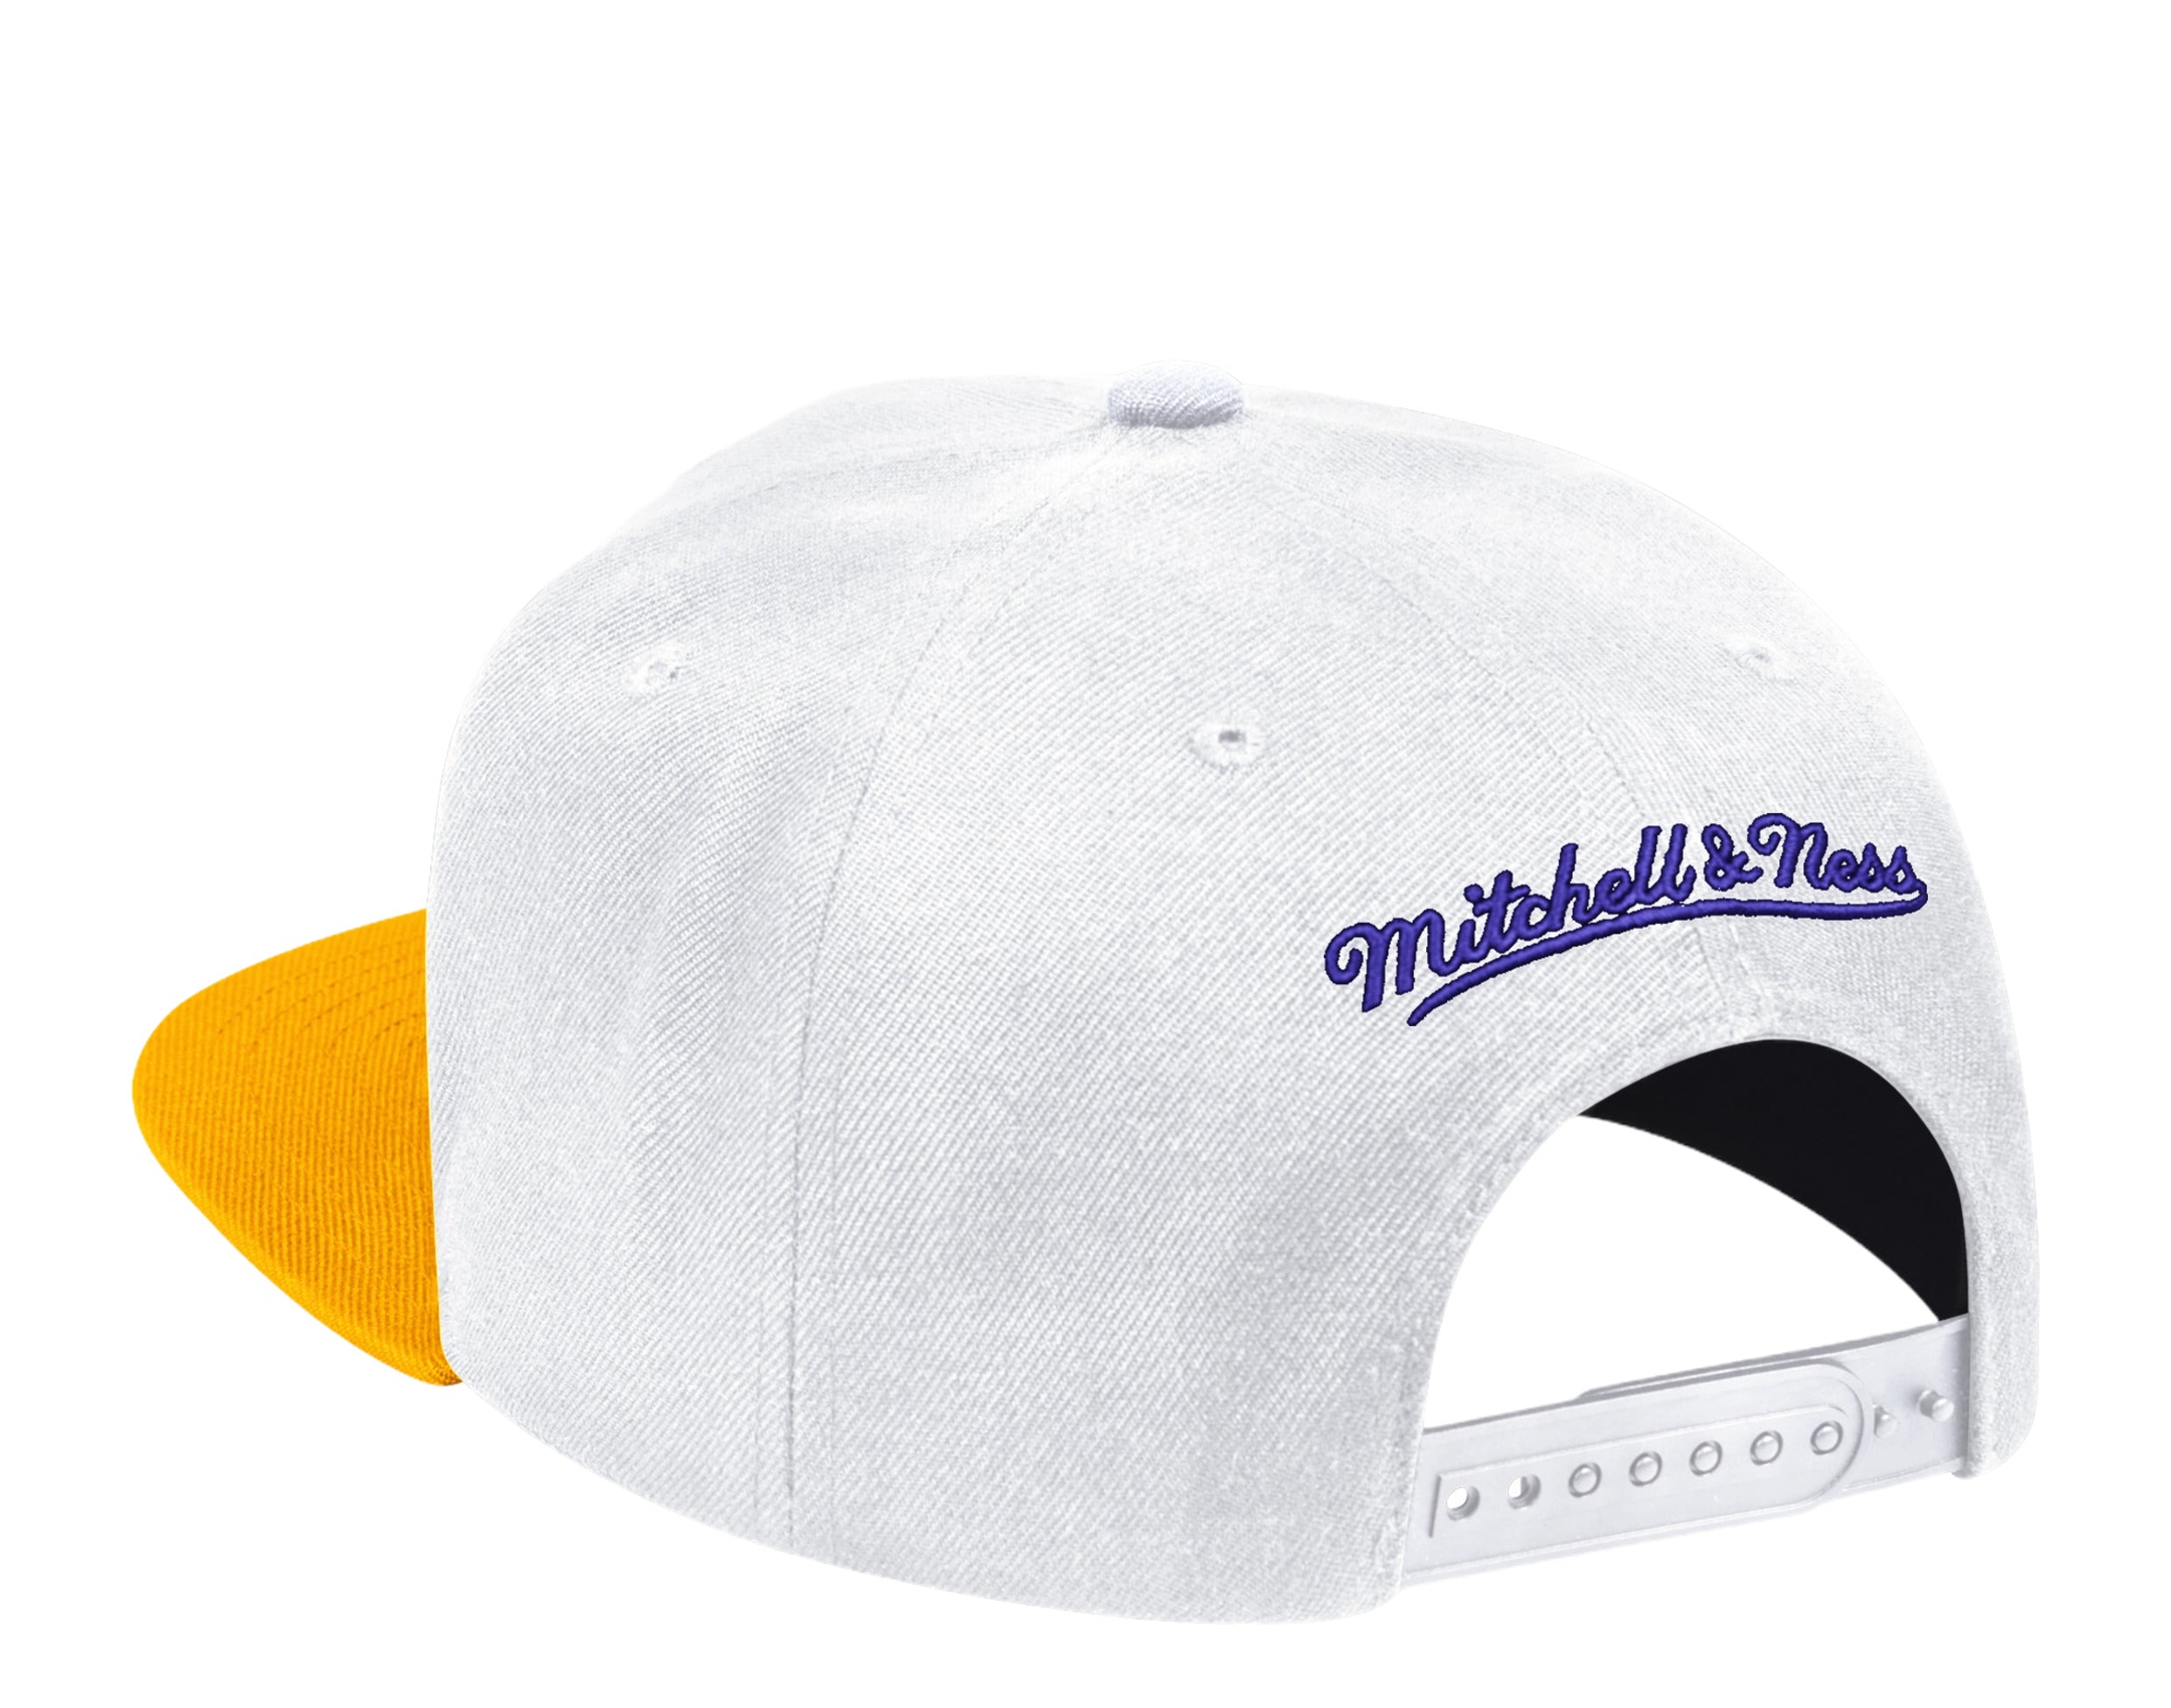 Los Angeles Lakers 2010 NBA Championship Hat for Sale in Los